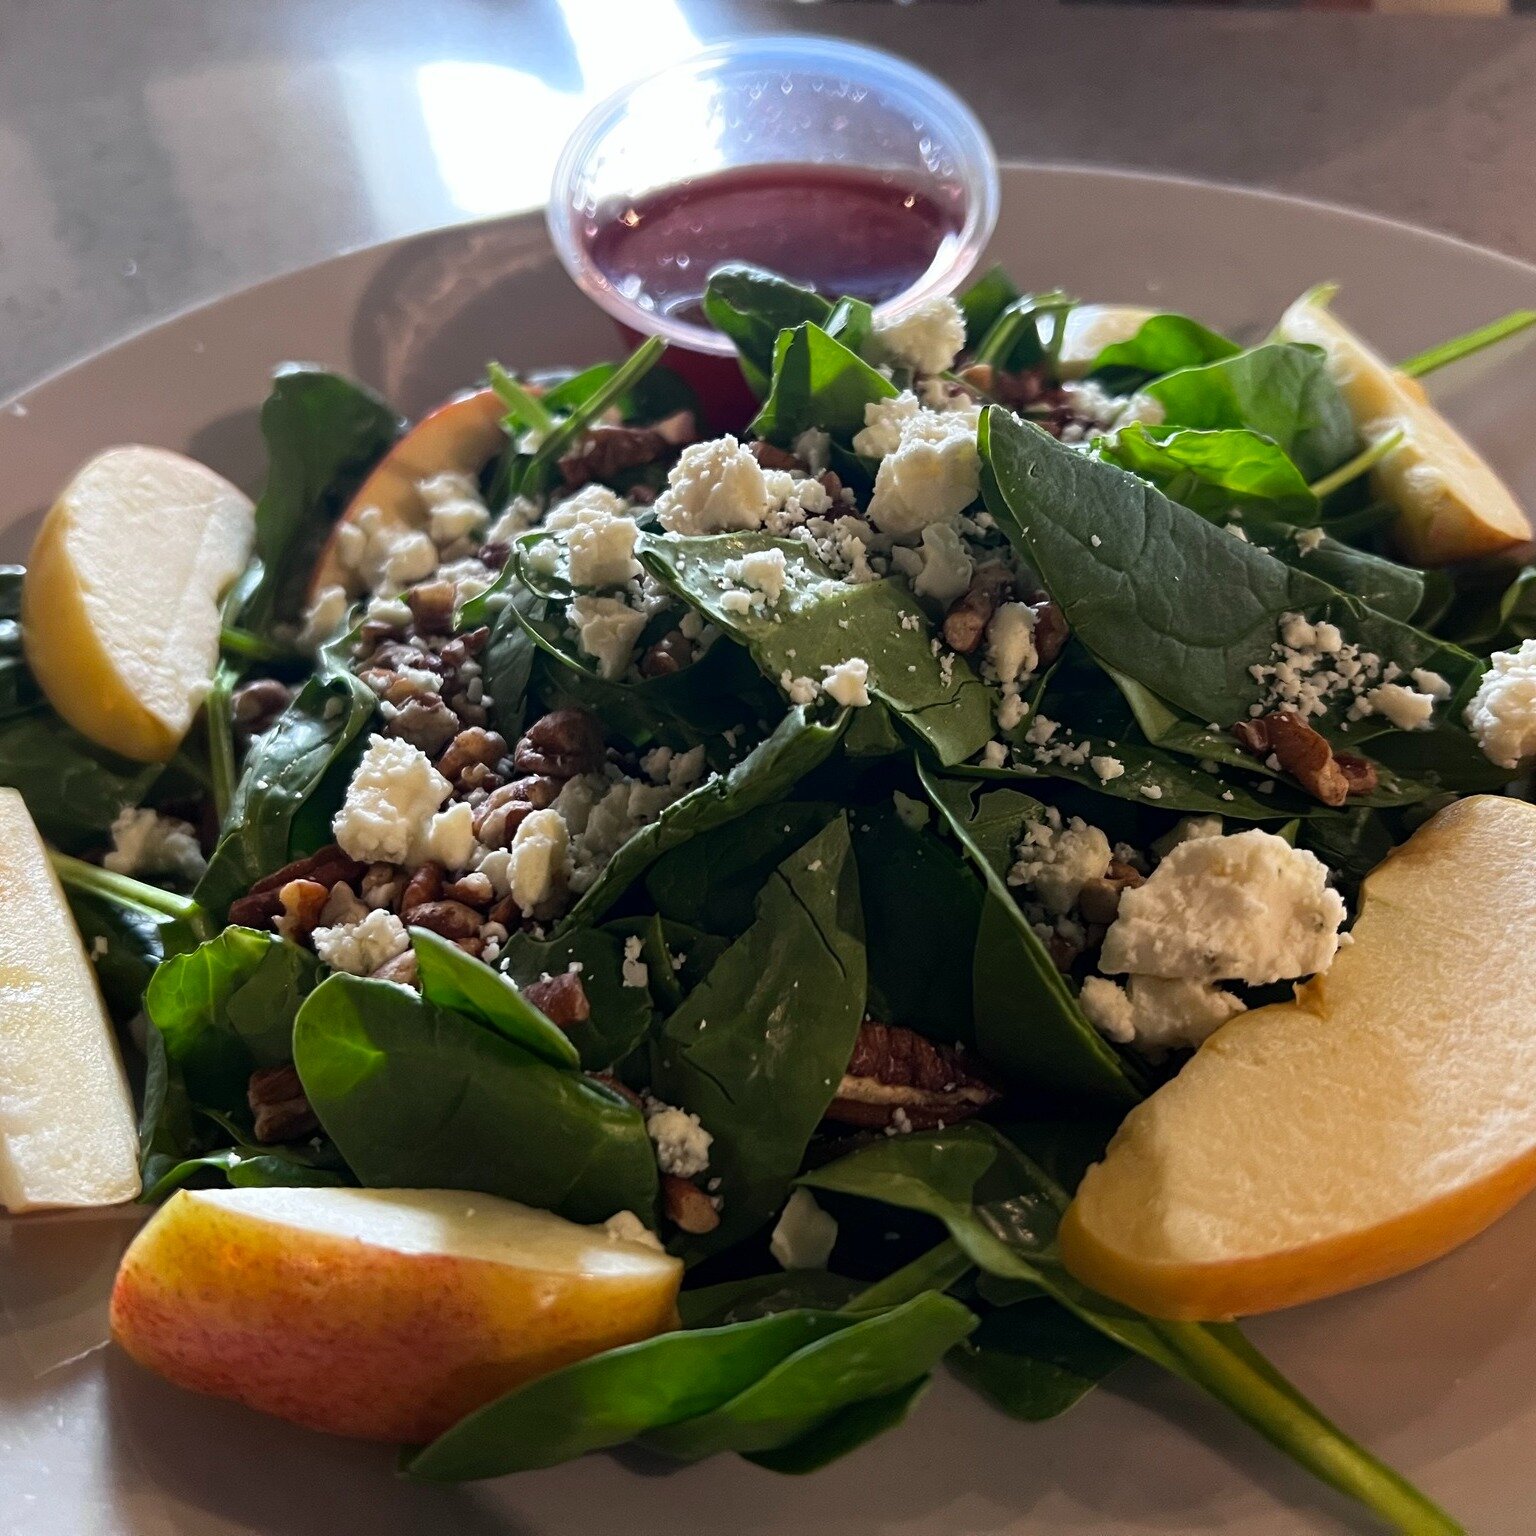 🥗 Refresh your day with our Spinach Apple Salad! 
Crisp spinach leaves, apple slices, pecans, and feta cheese, all brought together with a tangy raspberry vinaigrette on the side. 

📌 405 Silver St, Elko
📞 (775) 777-7931

#FreshSaladDays #SpinachA